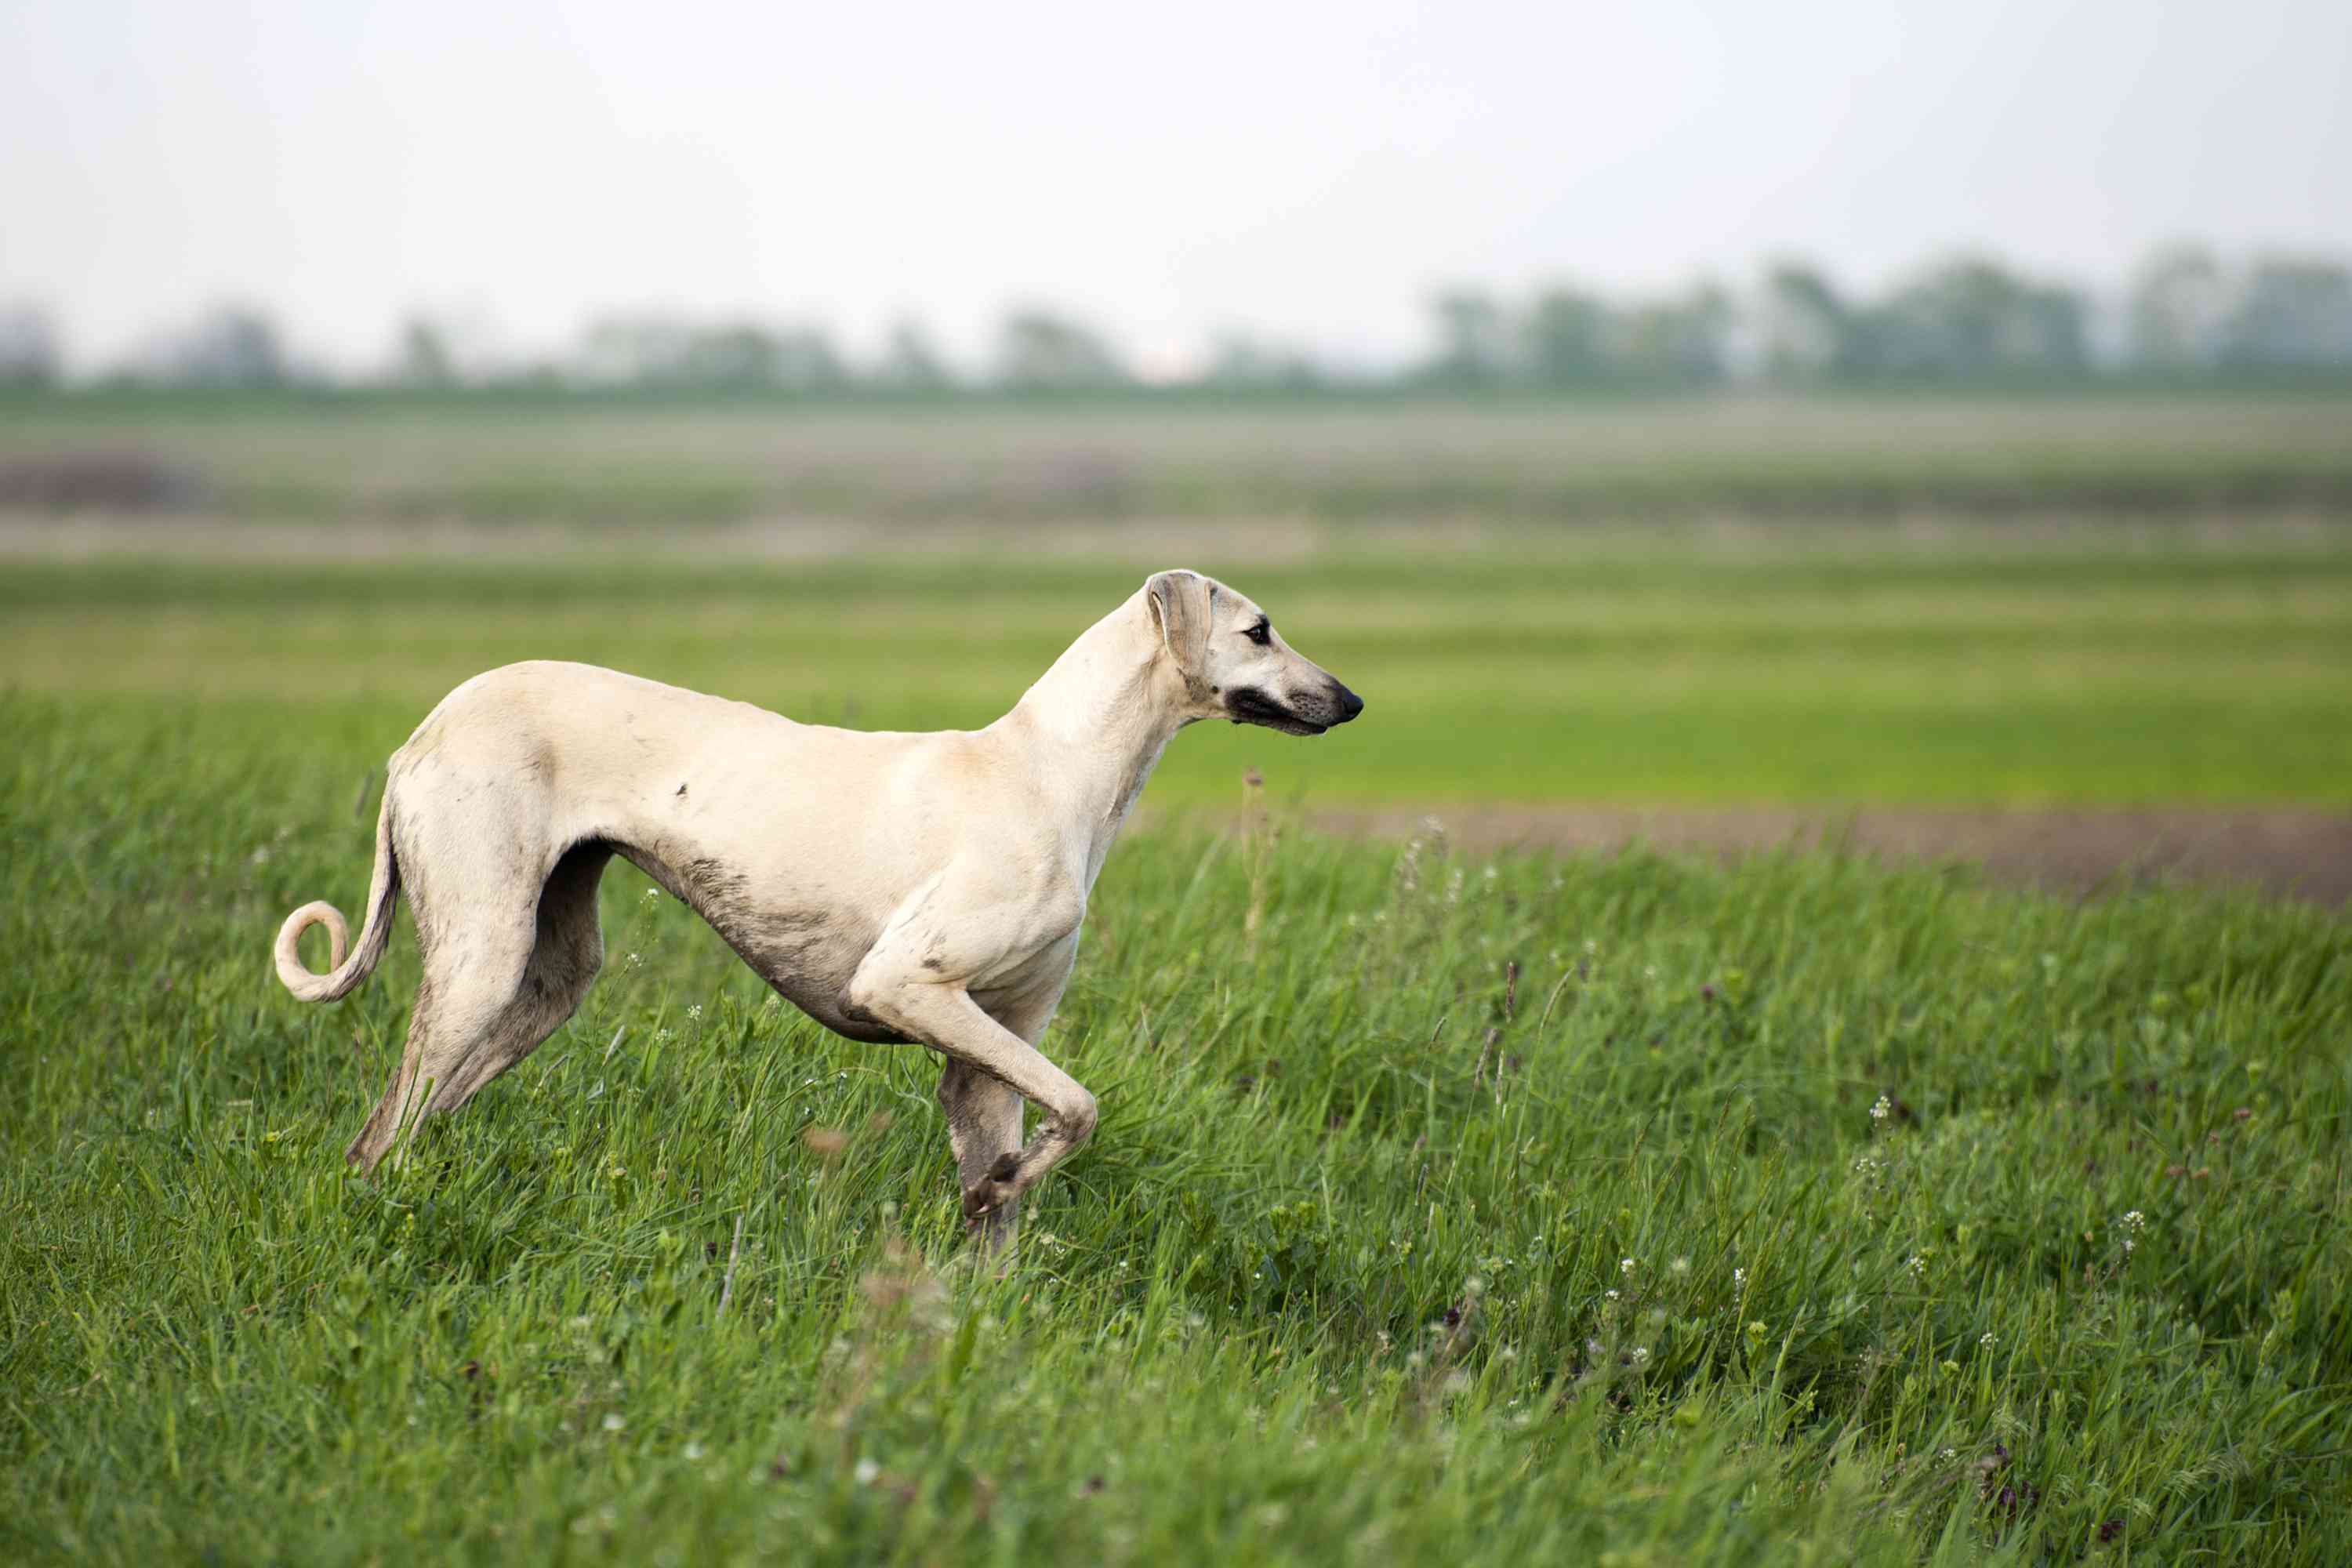 A sand-colored dog with a thin body and curled tail standing in the grass ready to run.